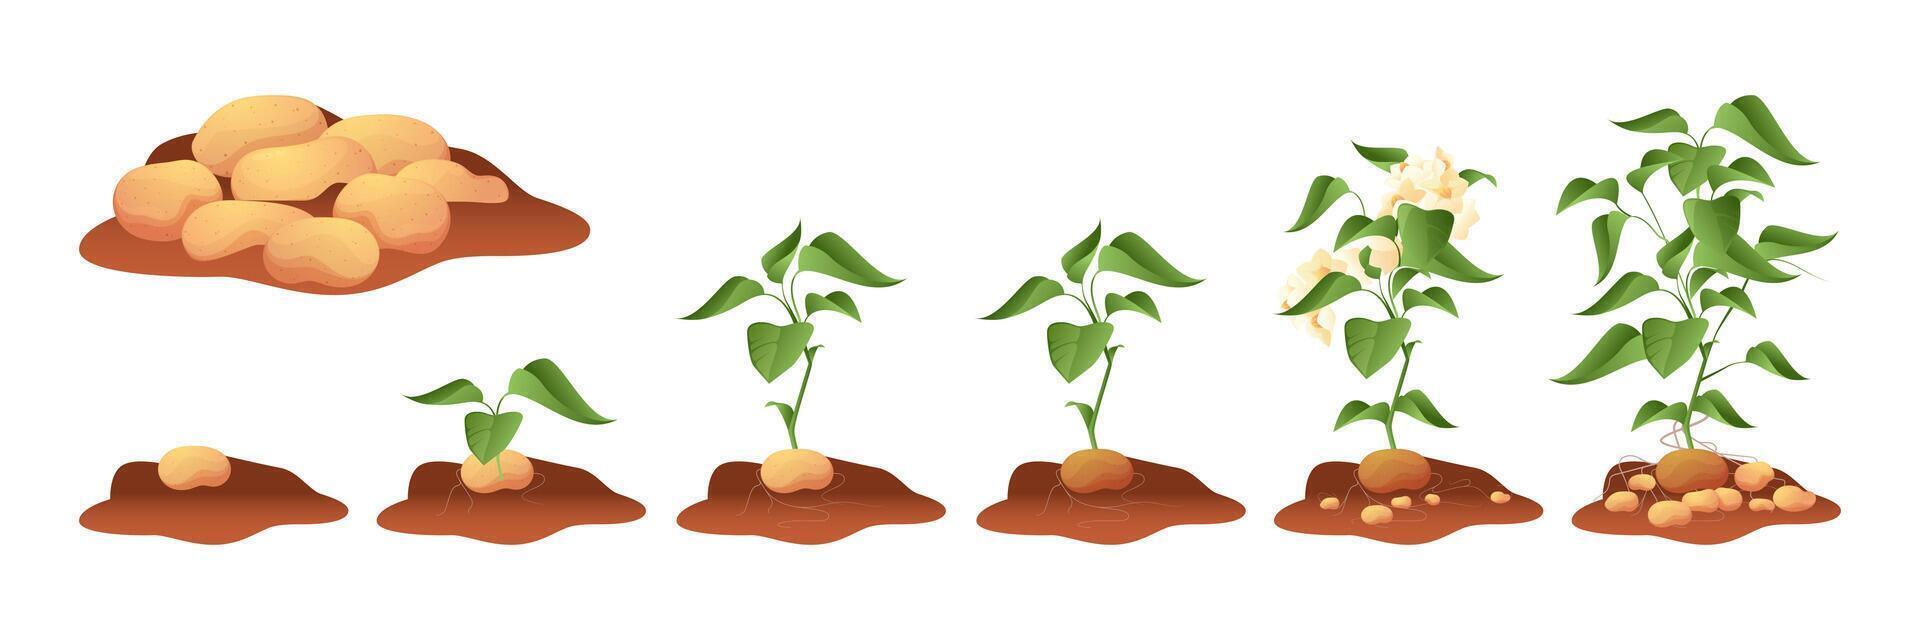 Potato growing. Tuberous crop with stem roots leaf in ground, vegetable plant grow cycle process from seed to ripe agriculture concept. Vector illustration